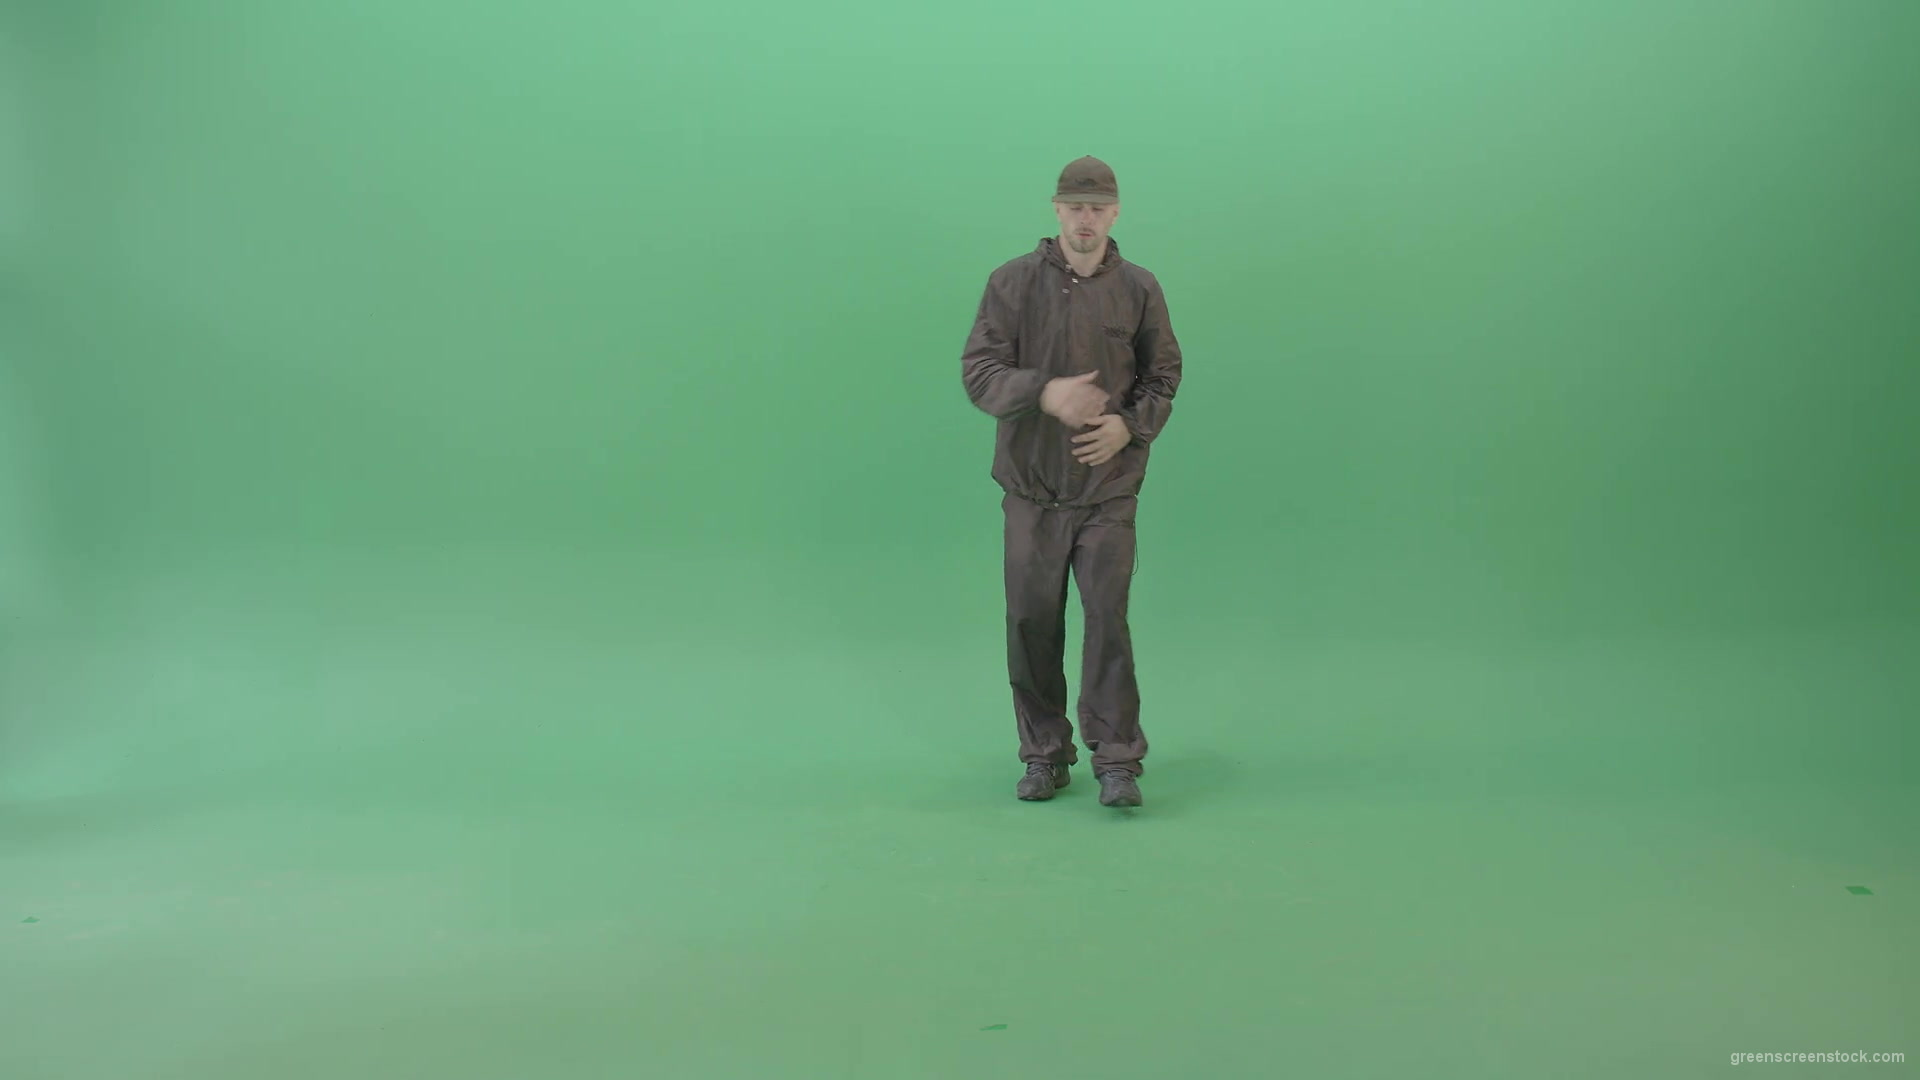 Athlete-Man-making-Air-freeze-on-hand-breaking-on-green-screen-4K-Video-Footage-1920_002 Green Screen Stock